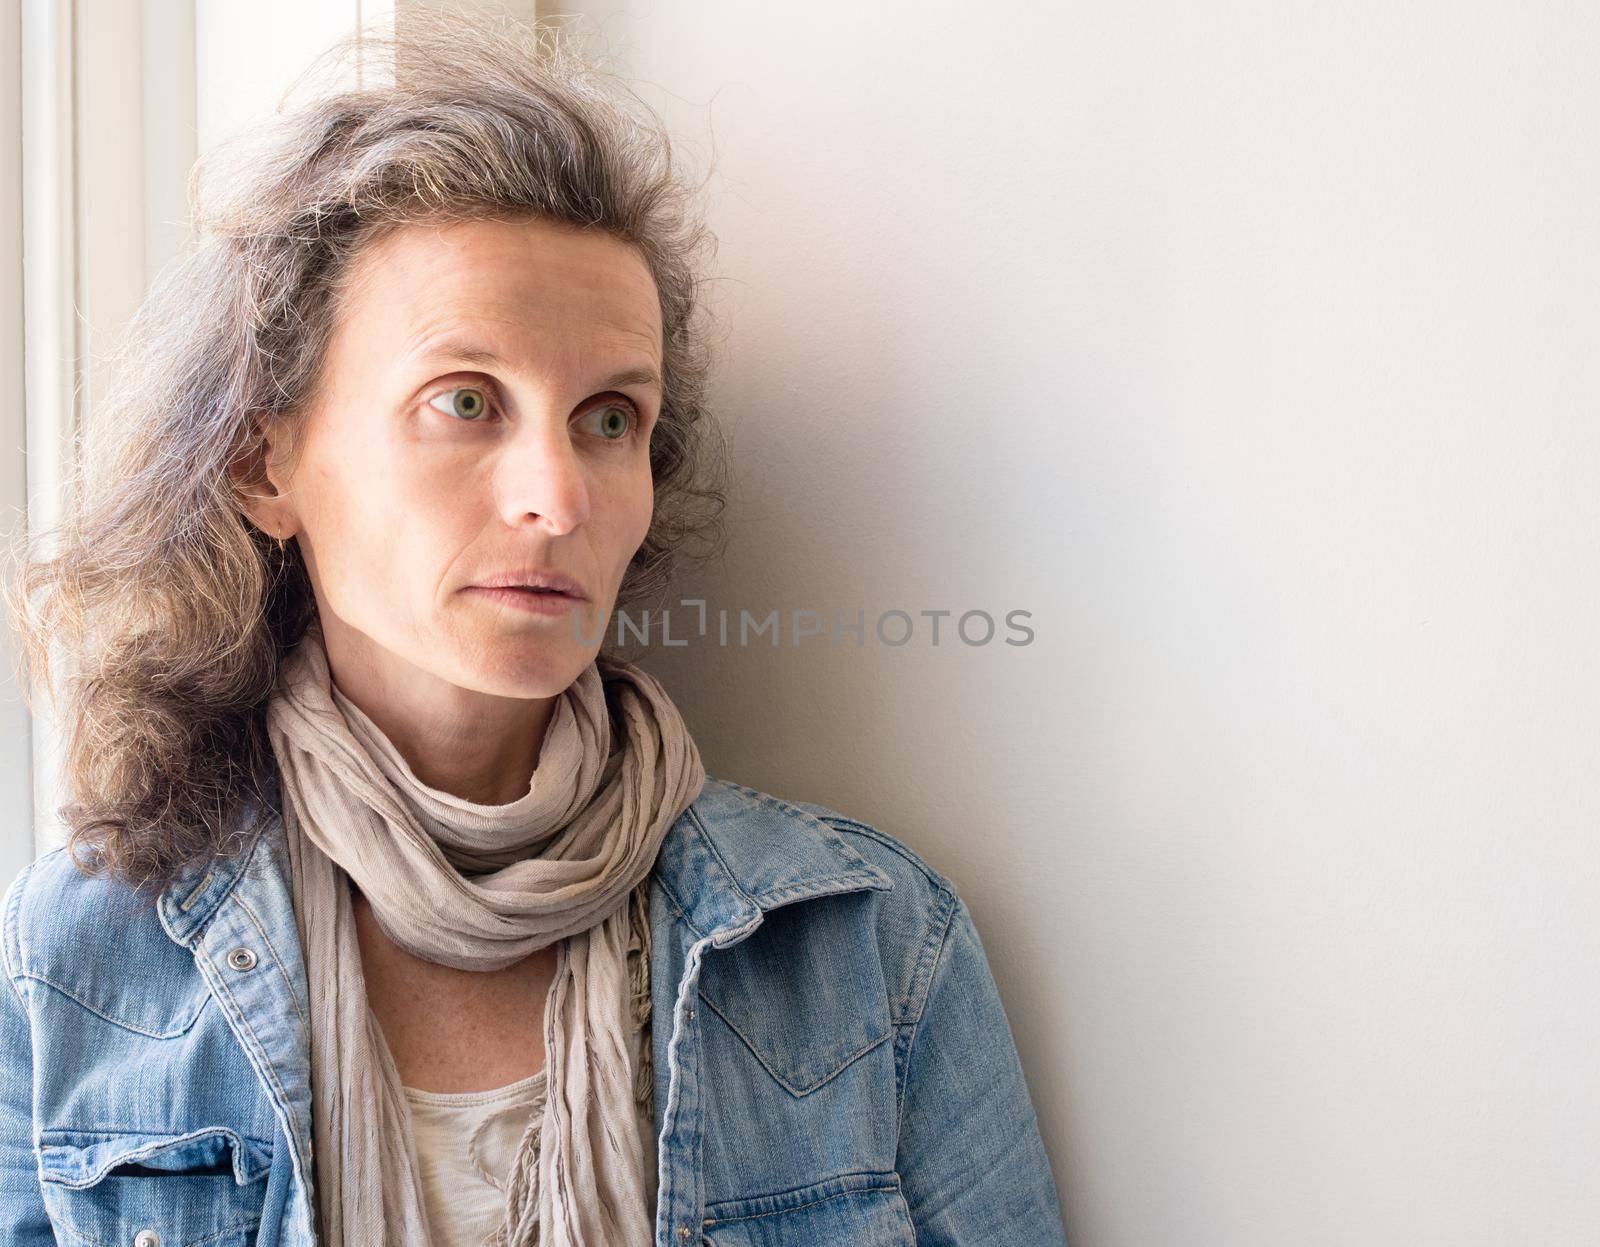 Middle aged woman with grey hair and denim shirt looking sad and anxious by natalie_board